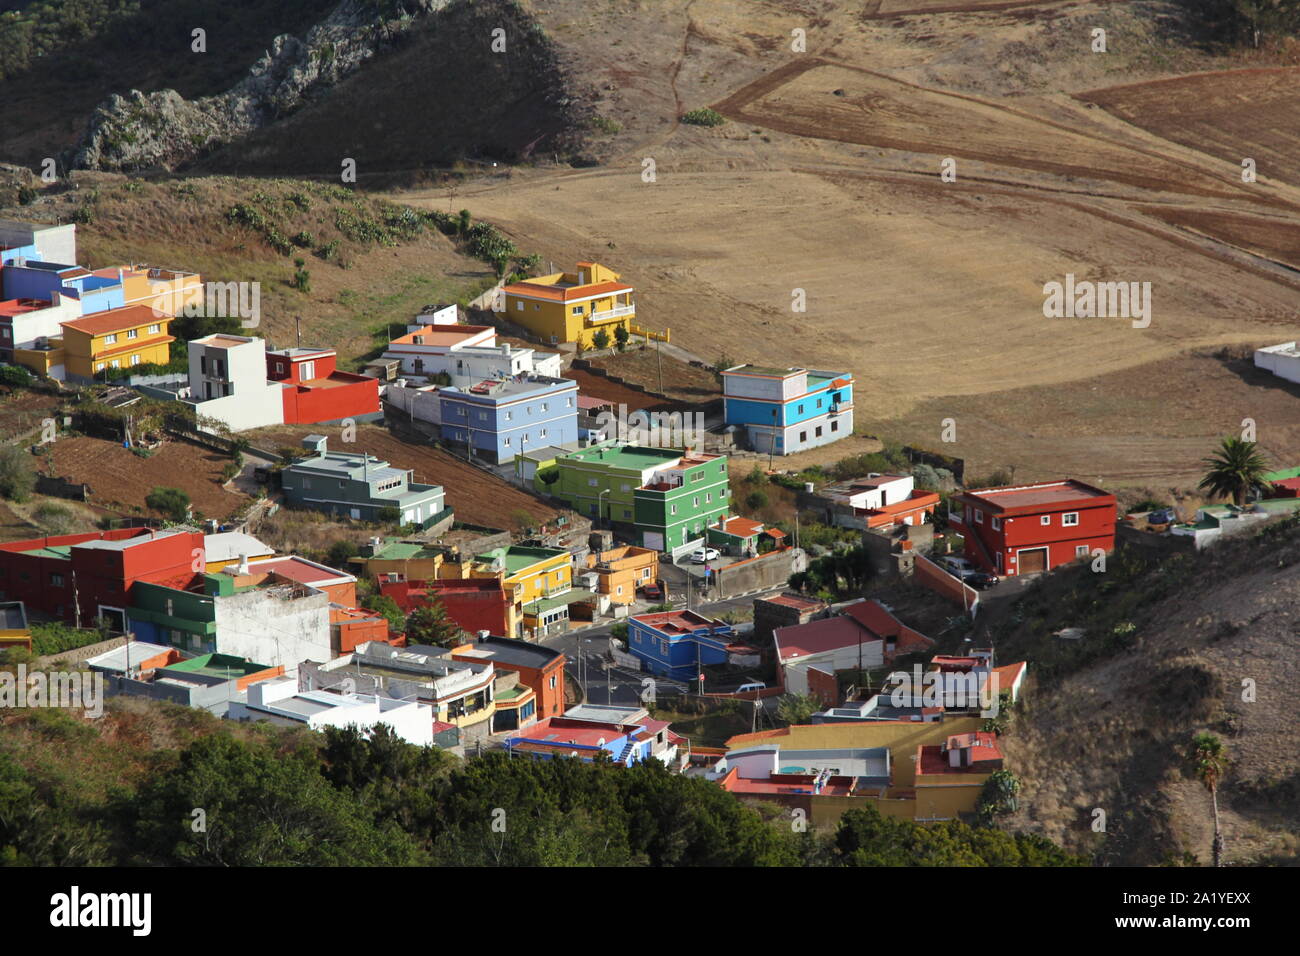 Village, Biosphere reserves, Top of Anaga Mountain Park drive, Tenerife, Canary Islands, Spain Stock Photo